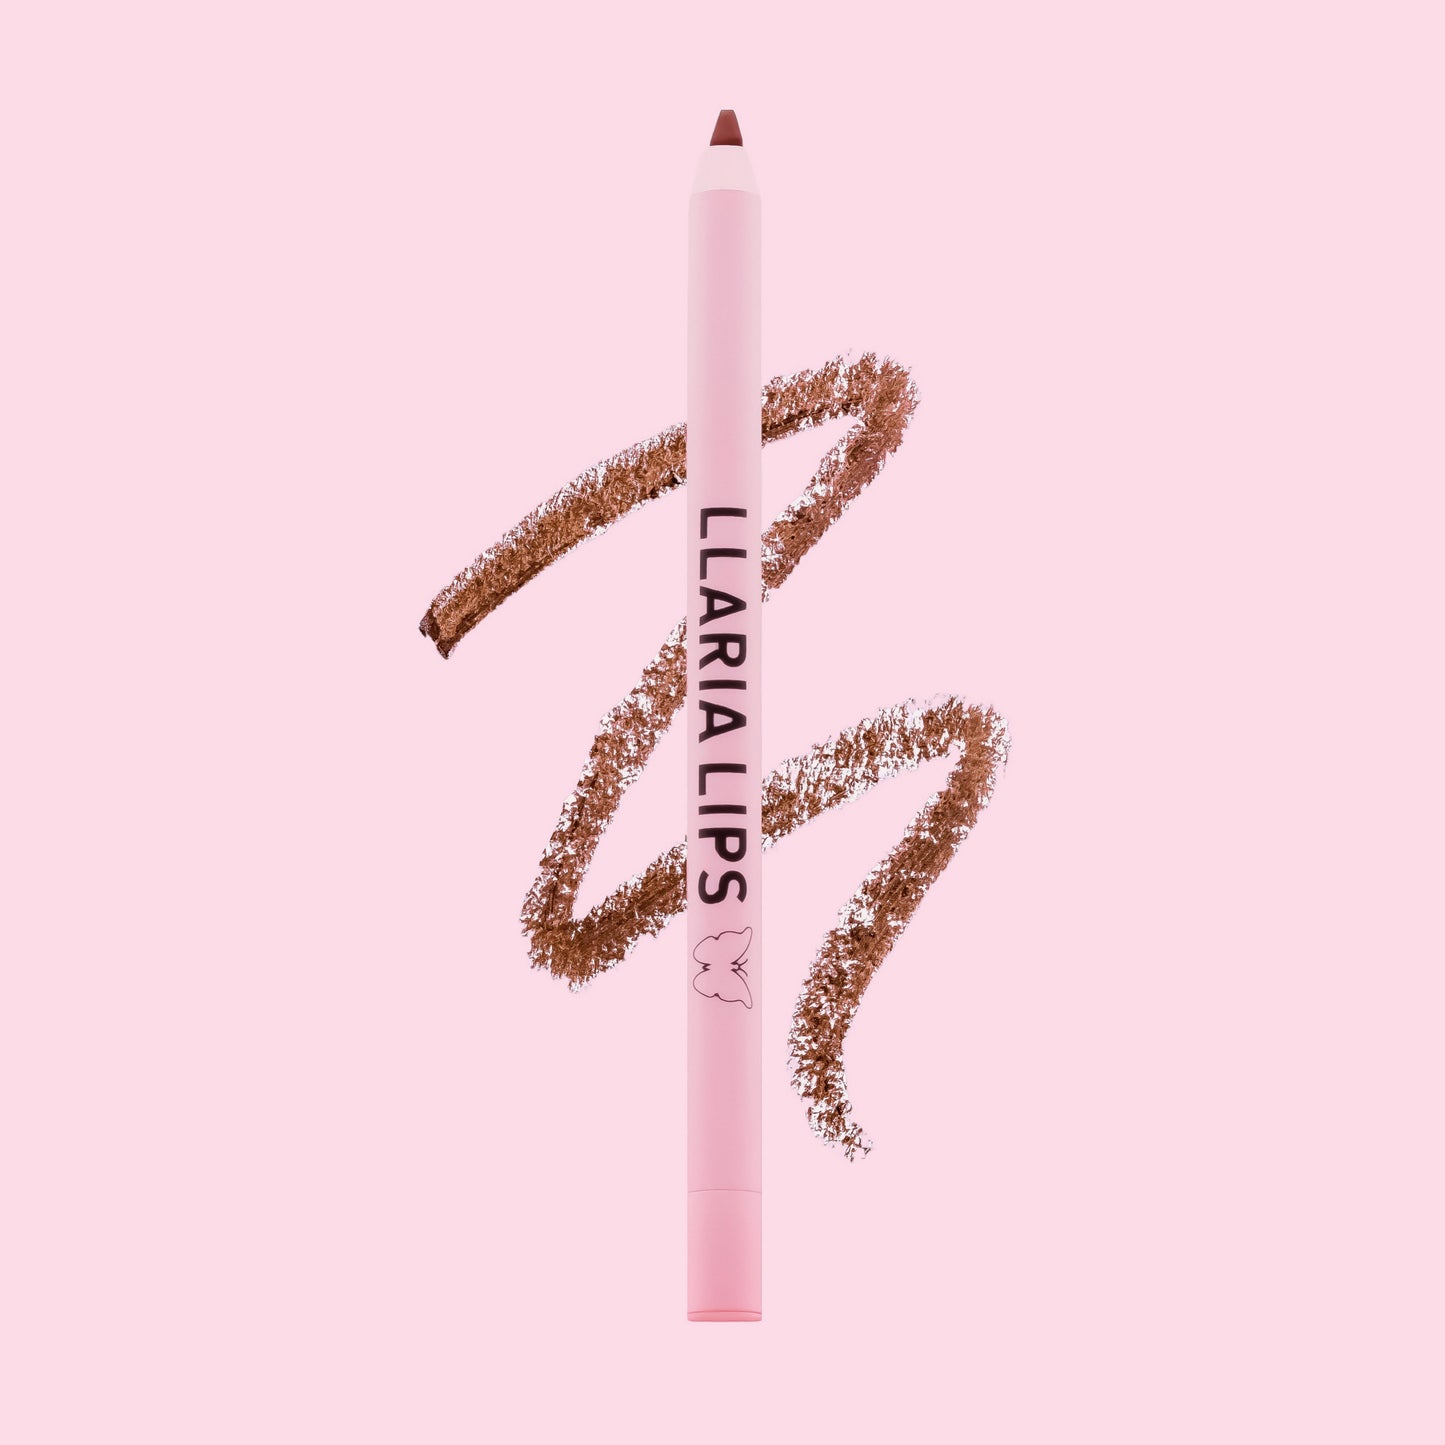 nude lip swatch with pink lip liner pencil.